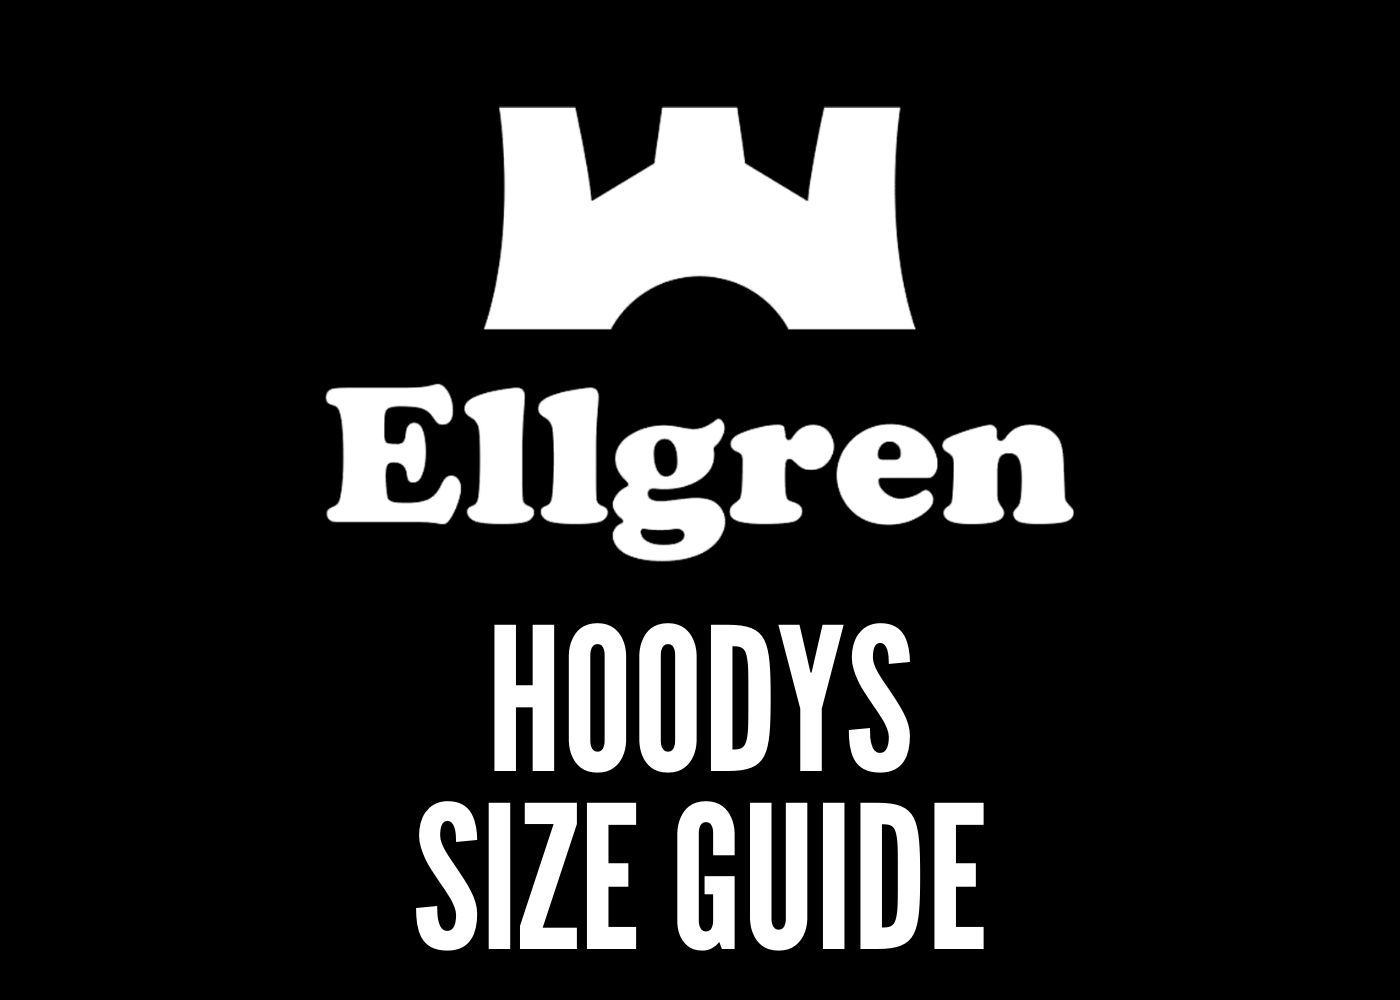 Hoody - Size Guide